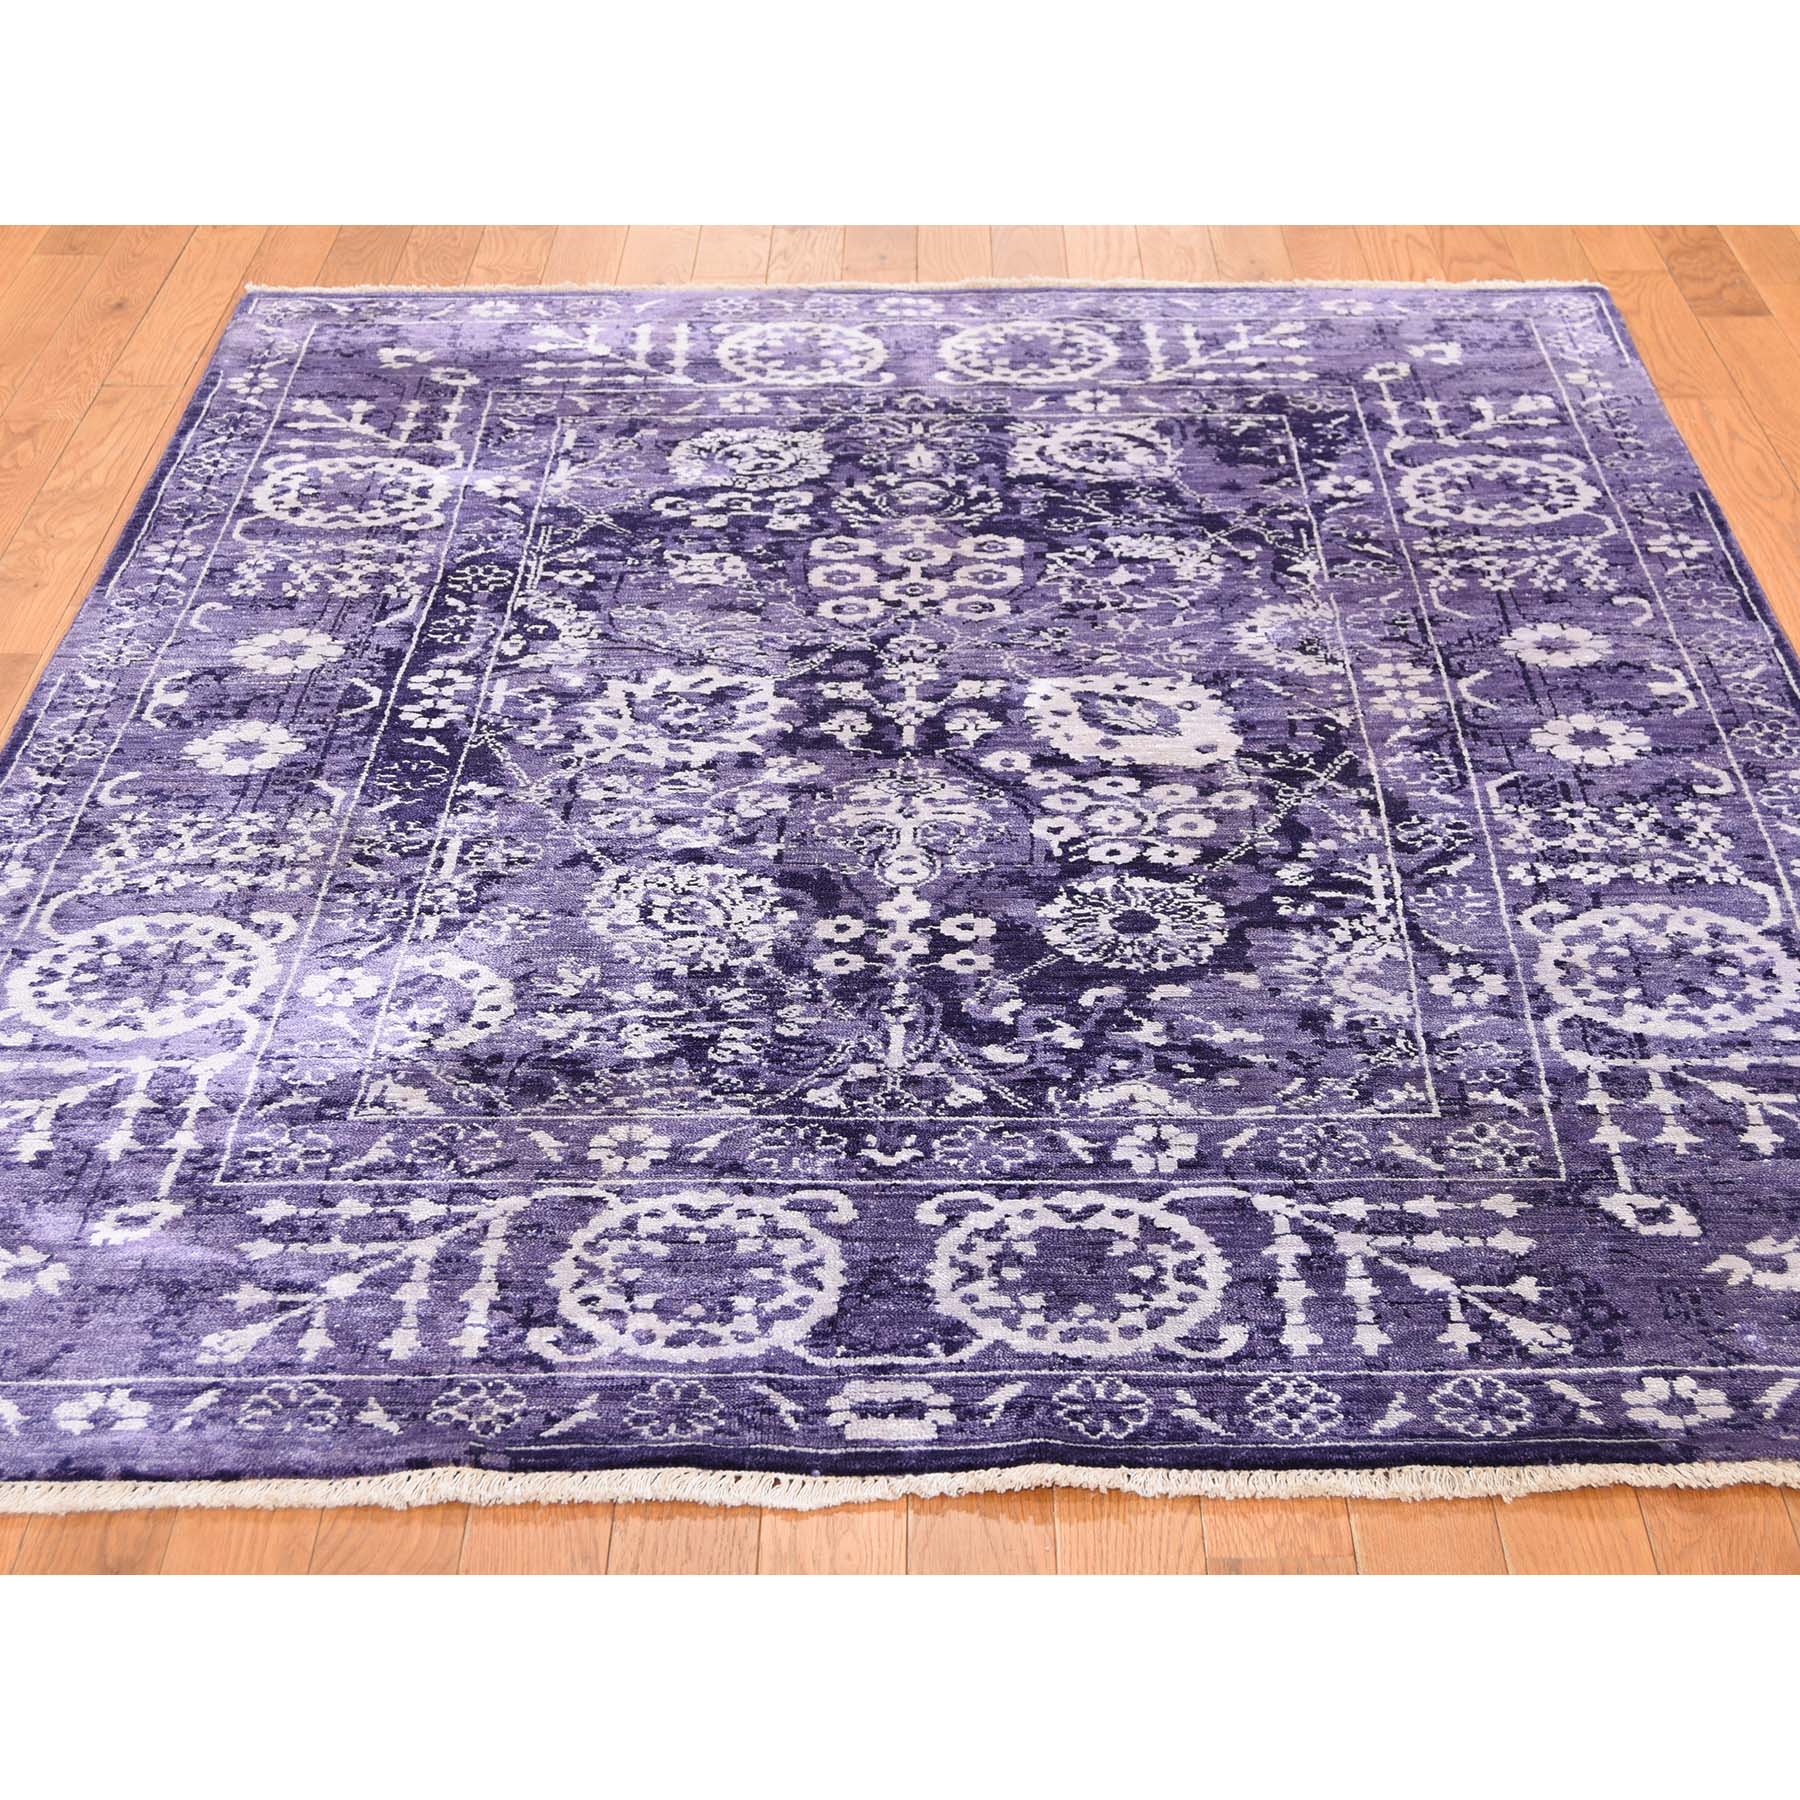 4-10 x6-8  Transitional Purple Tabriz Wool and Silk Hand-Knotted Oriental Rug 